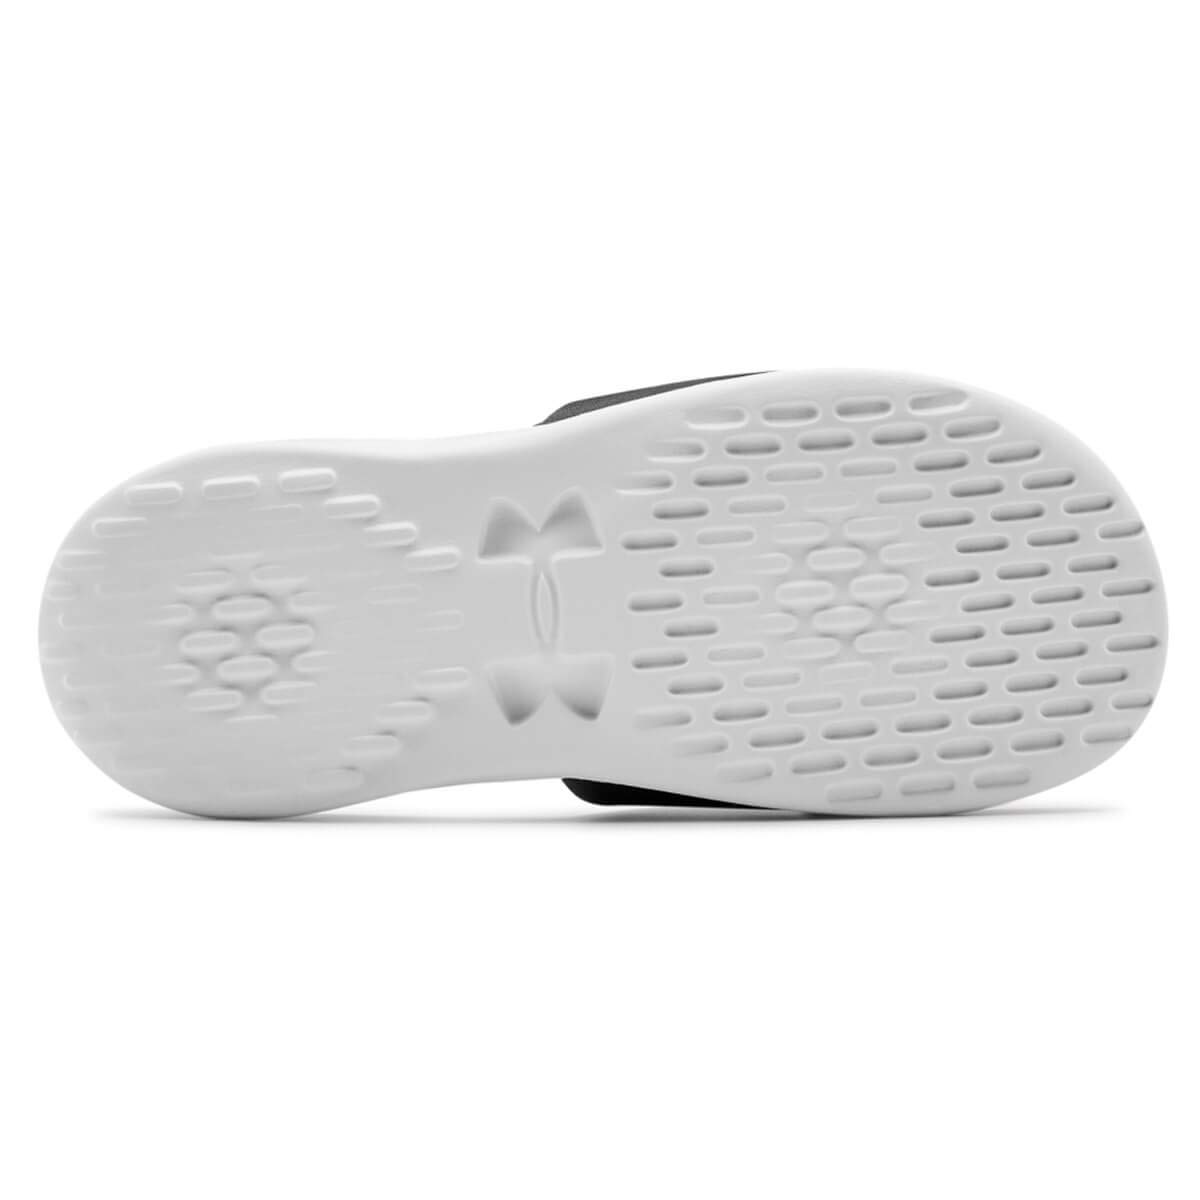 Under Armour Women's Playmaker Fixed Strap Sandal, White (104)/beta, 12 M US